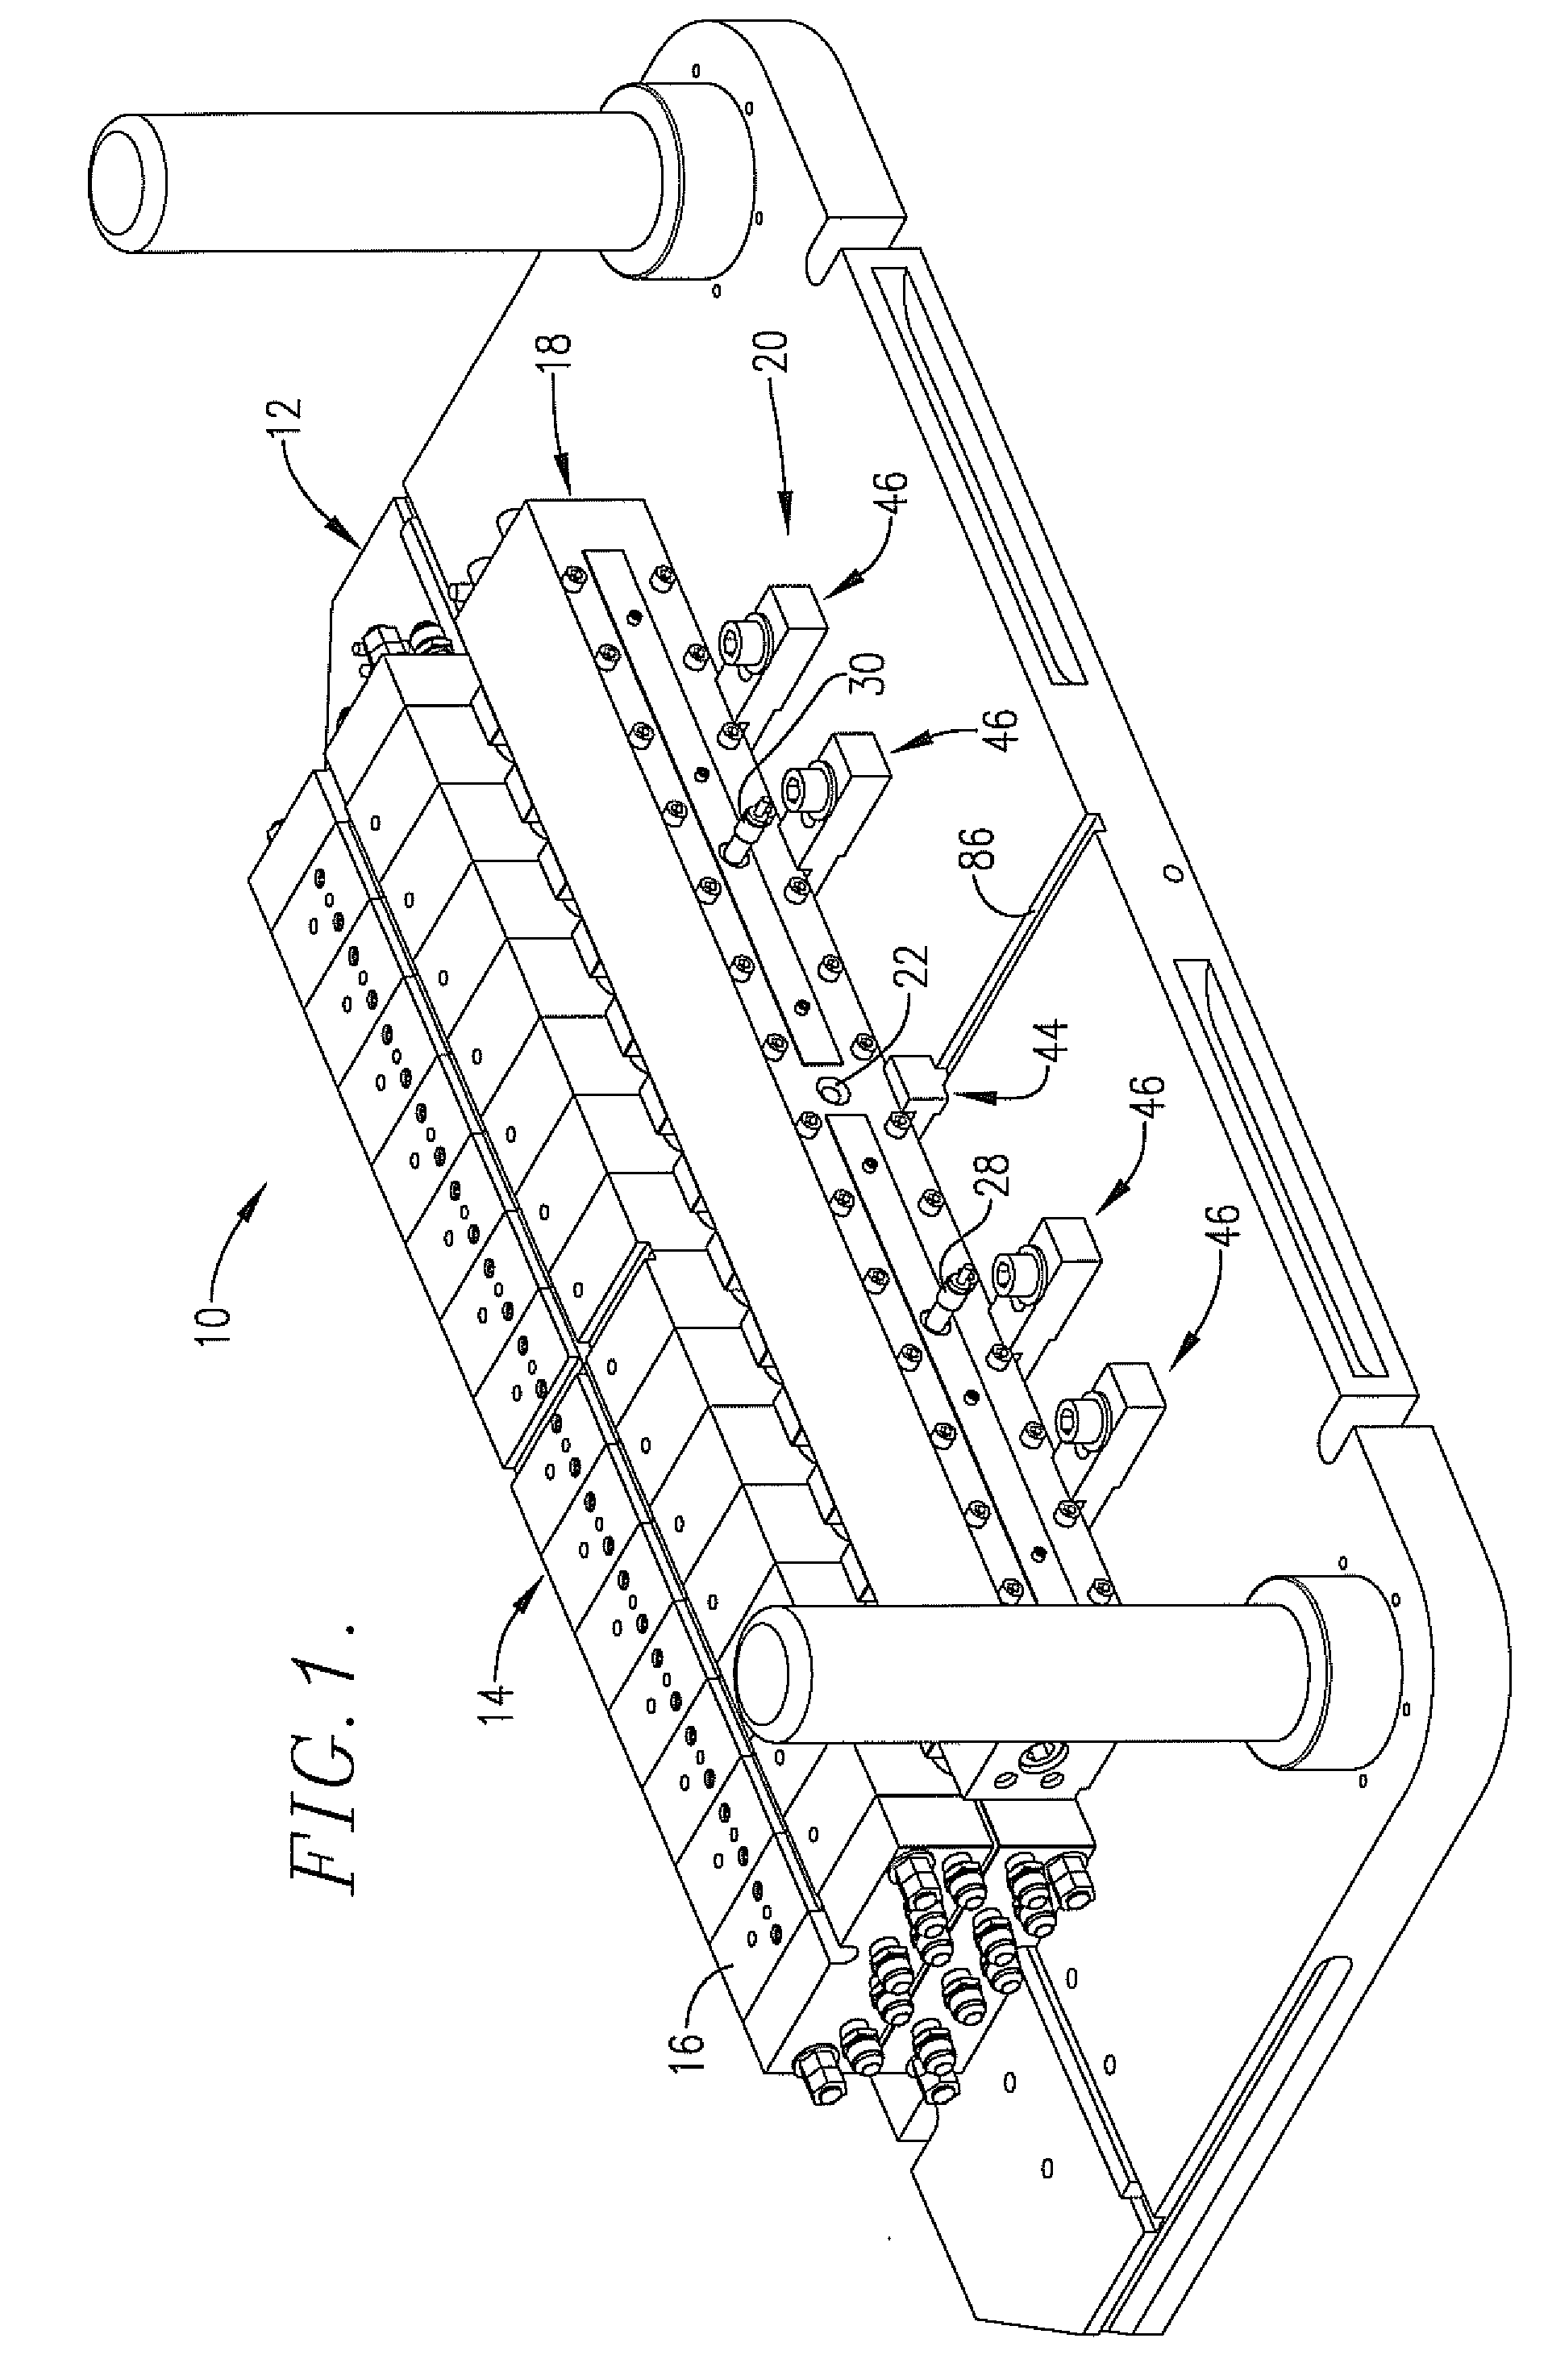 Universal Mounting Brackets for Attaching a Hot Injection Manifold to the Lower Die Set of an Injection Blow Molding Machine